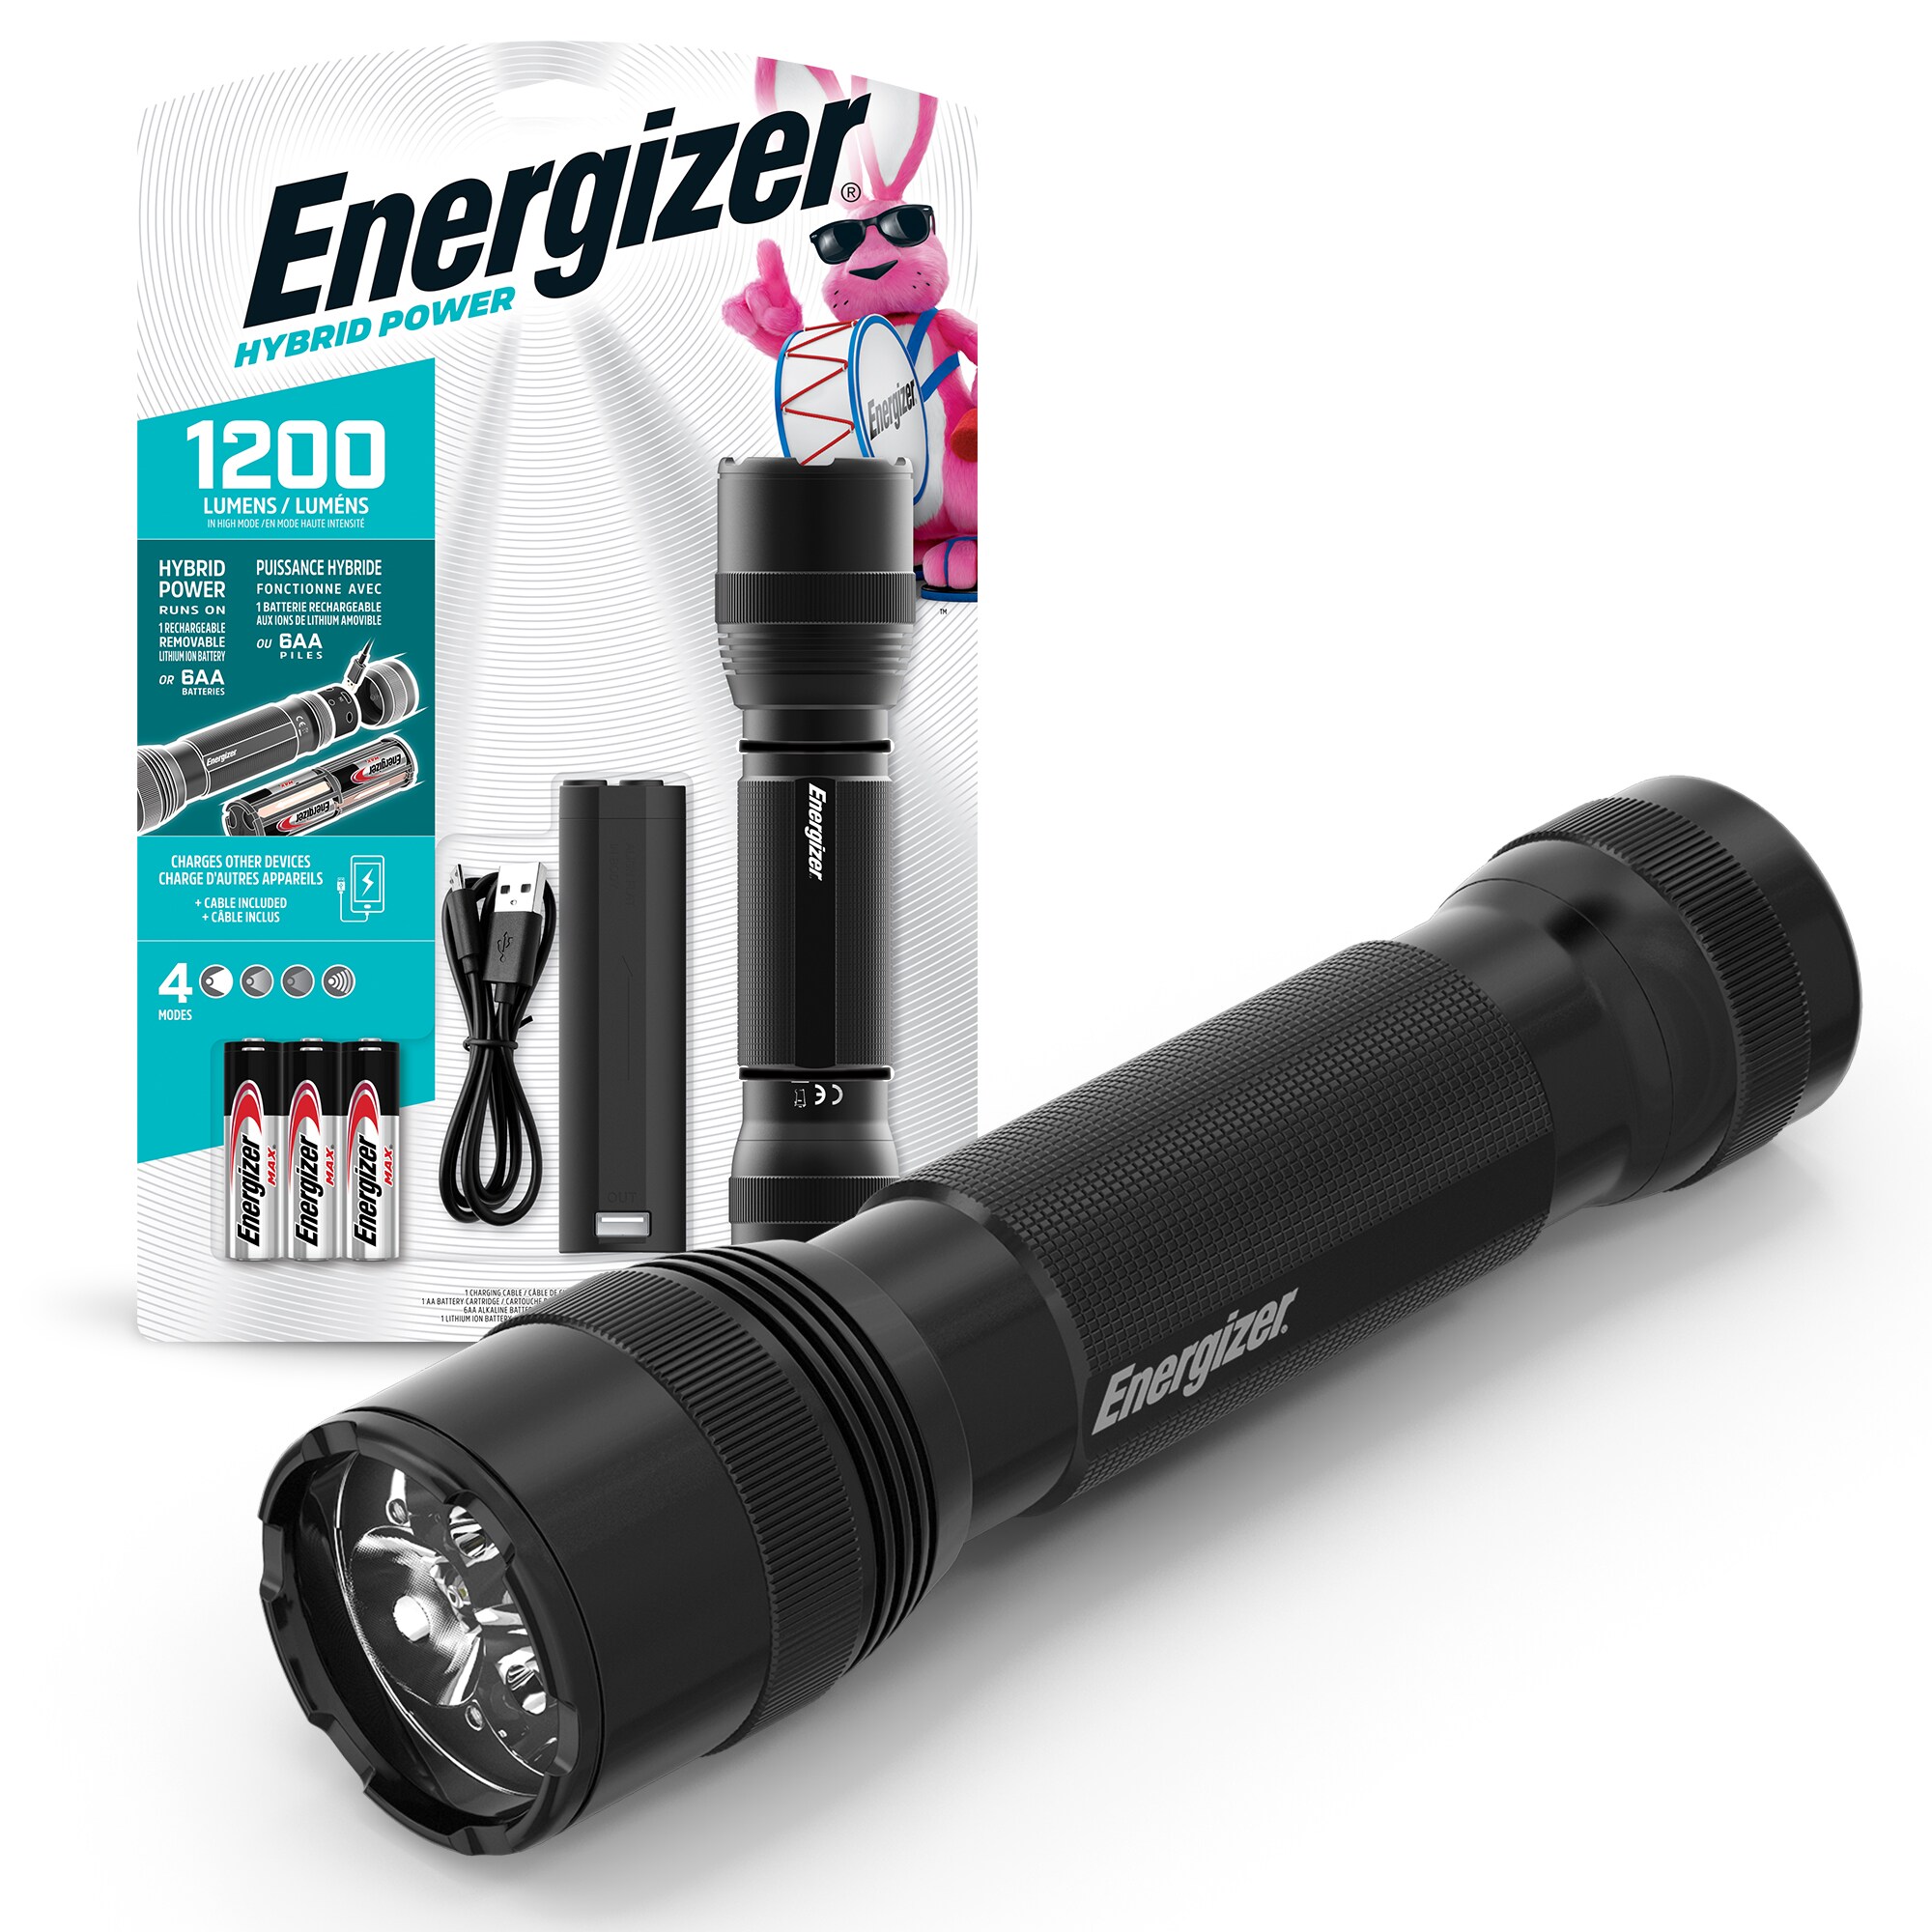 Energizer Hybrid 1200-Lumen Battery Flashlights 3 Modes the Flashlight (AA Included) department at LED in Rechargeable